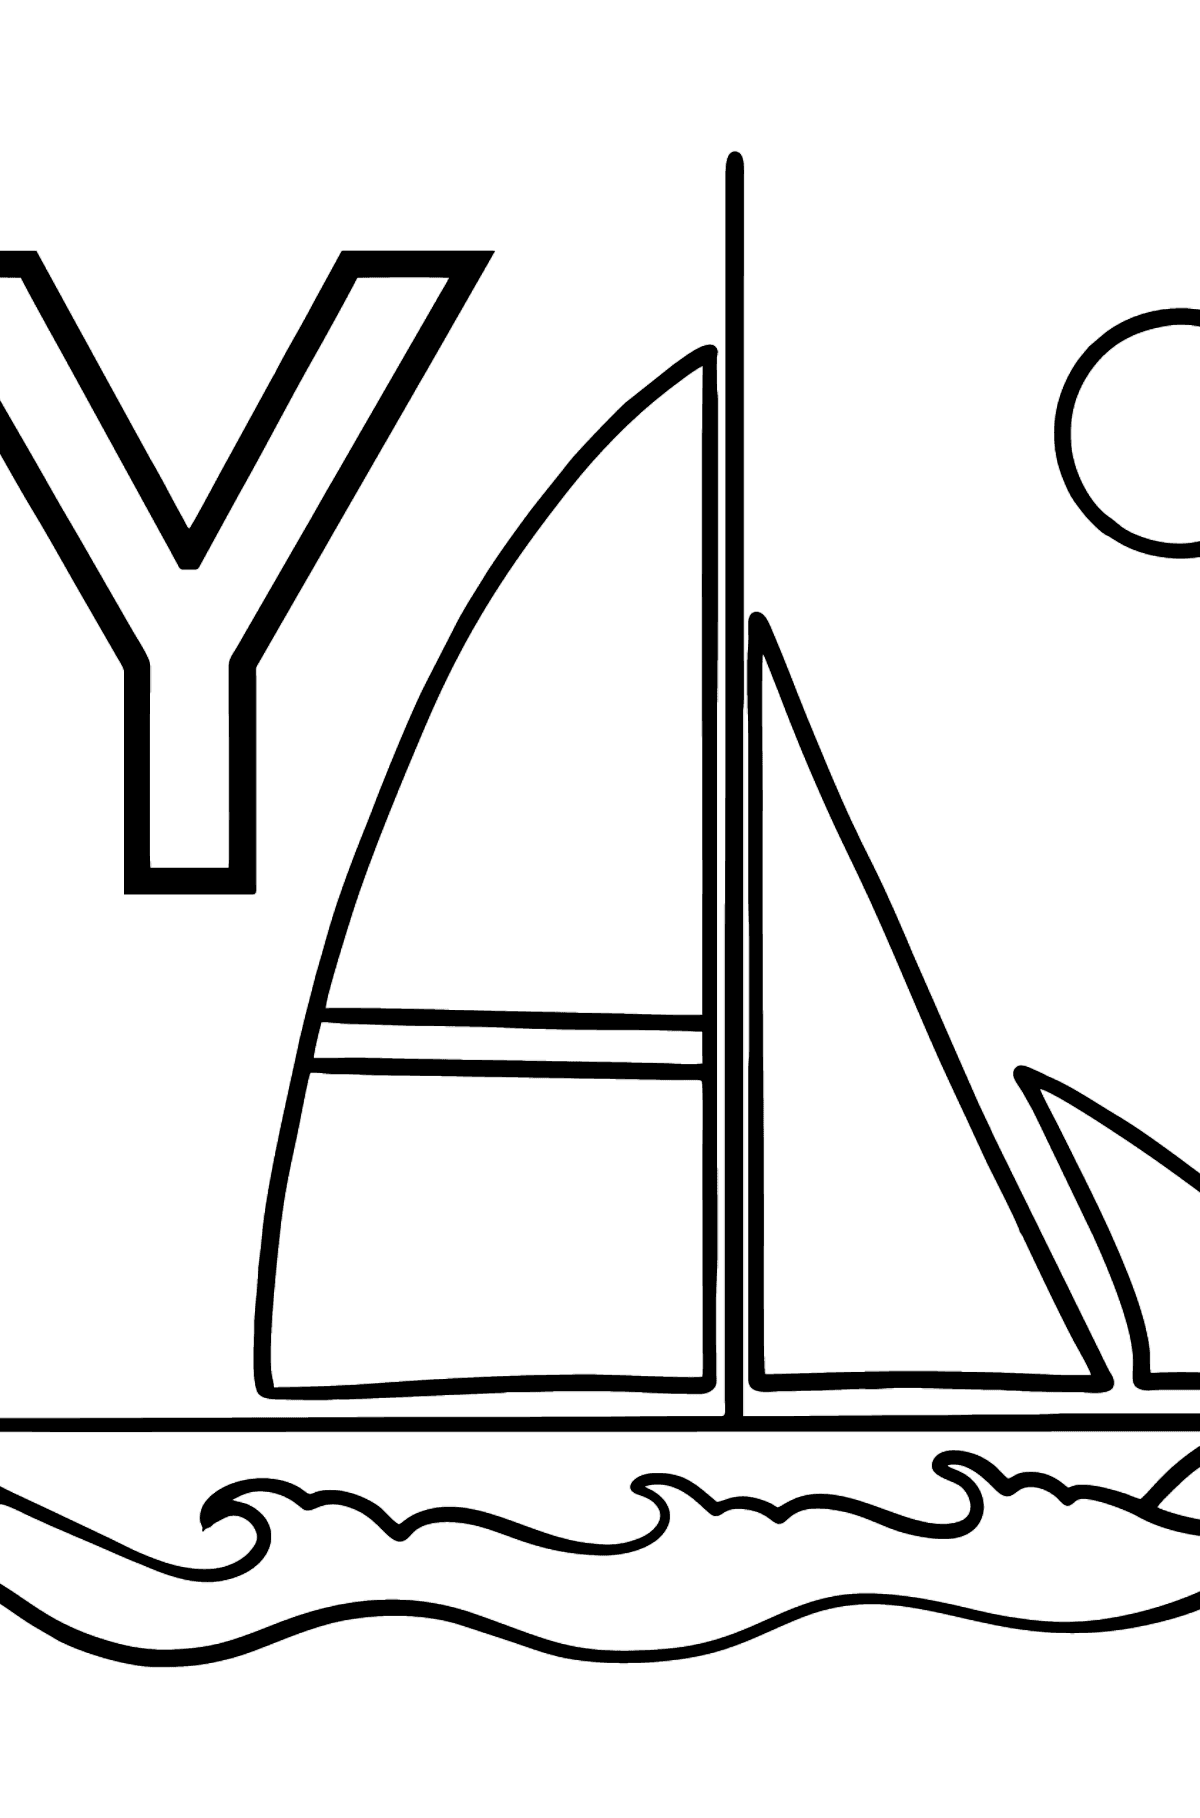 German Letter Y coloring pages - YACHT - Coloring Pages for Kids